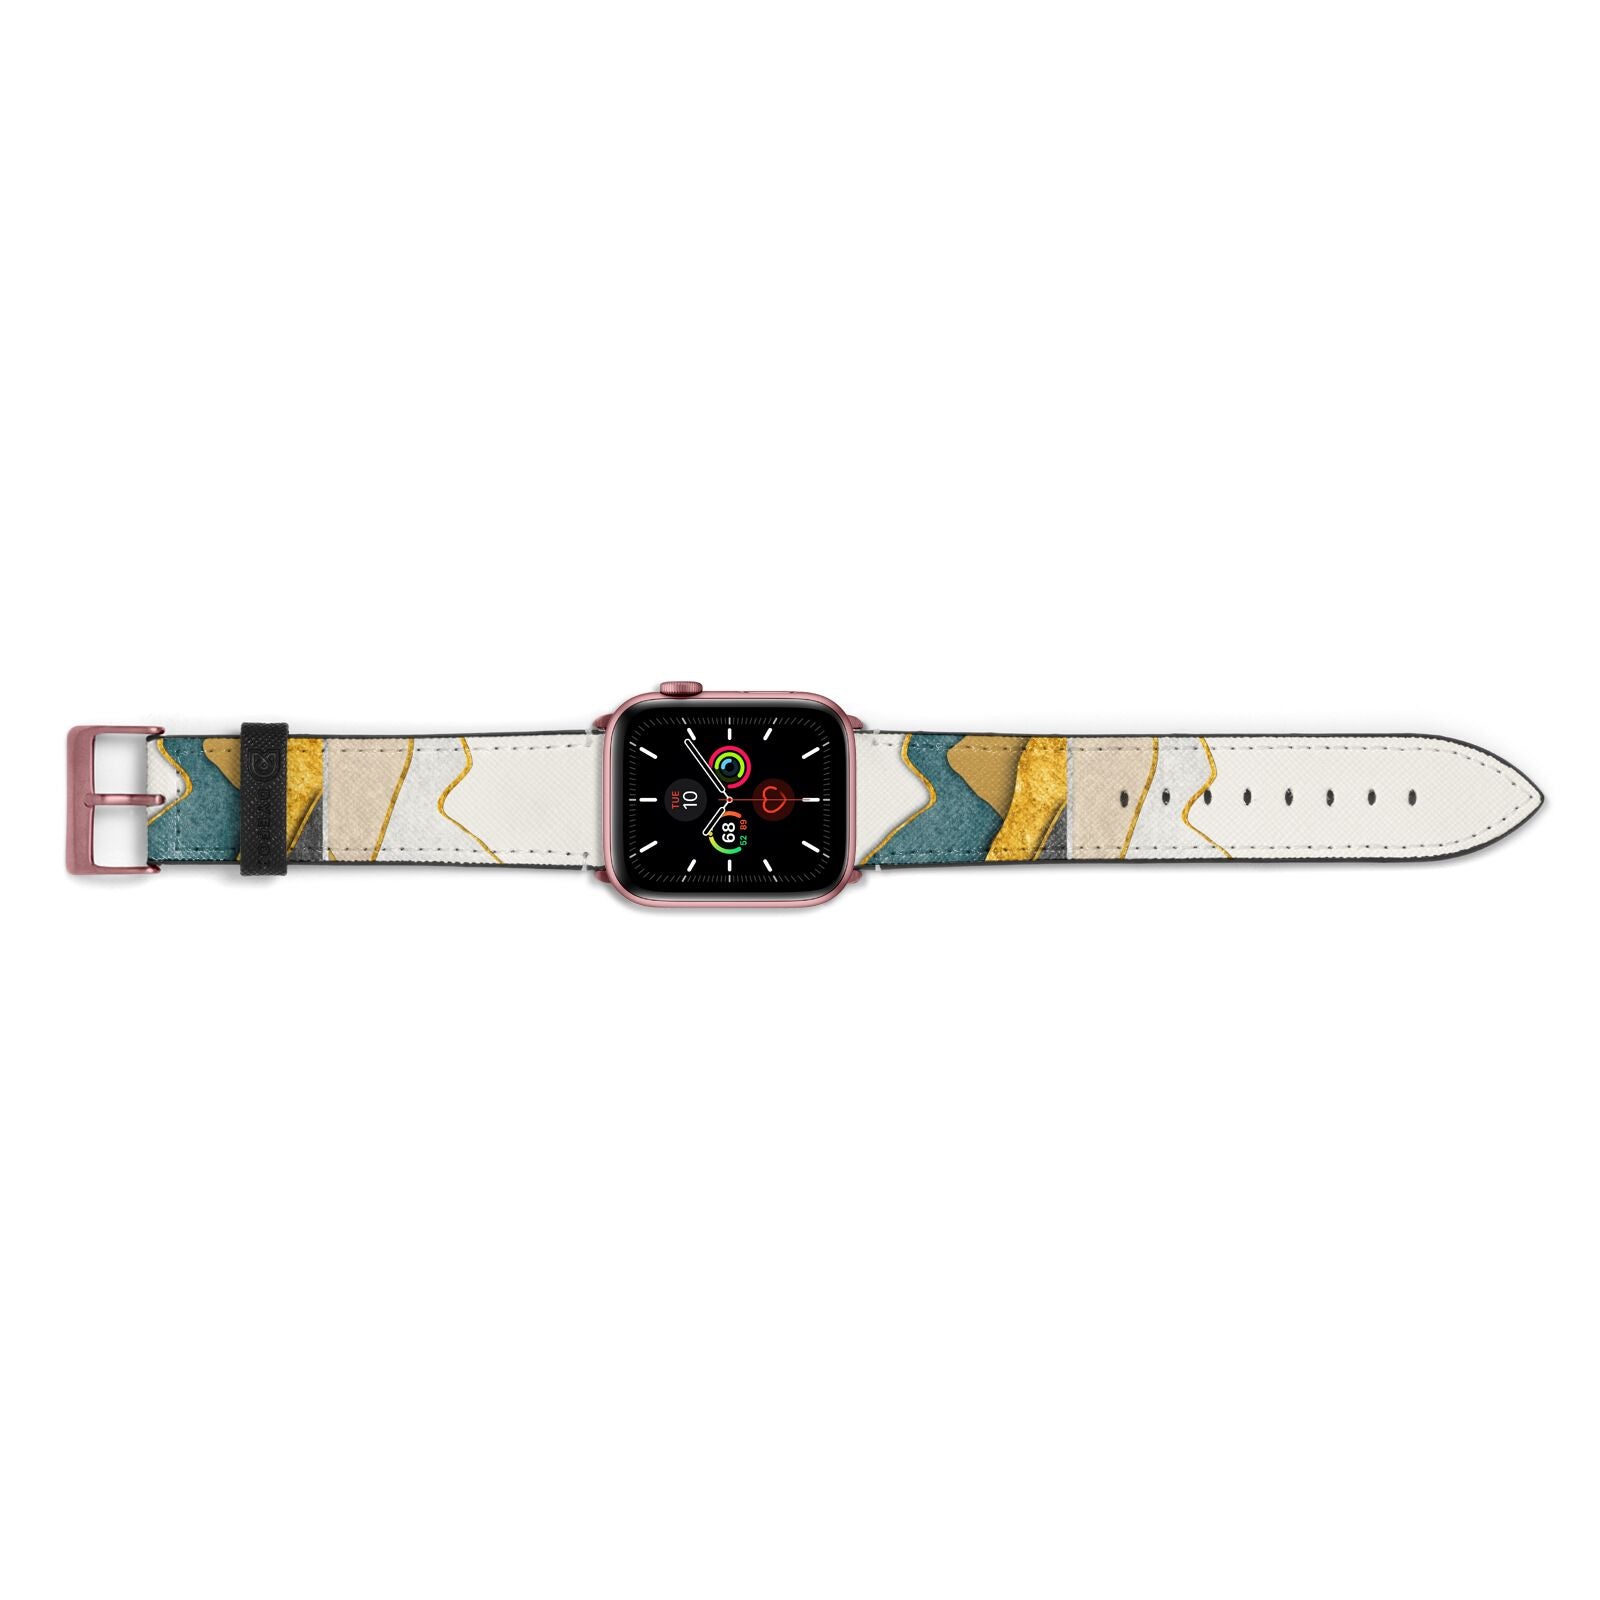 Abstract Mountain Apple Watch Strap Landscape Image Rose Gold Hardware